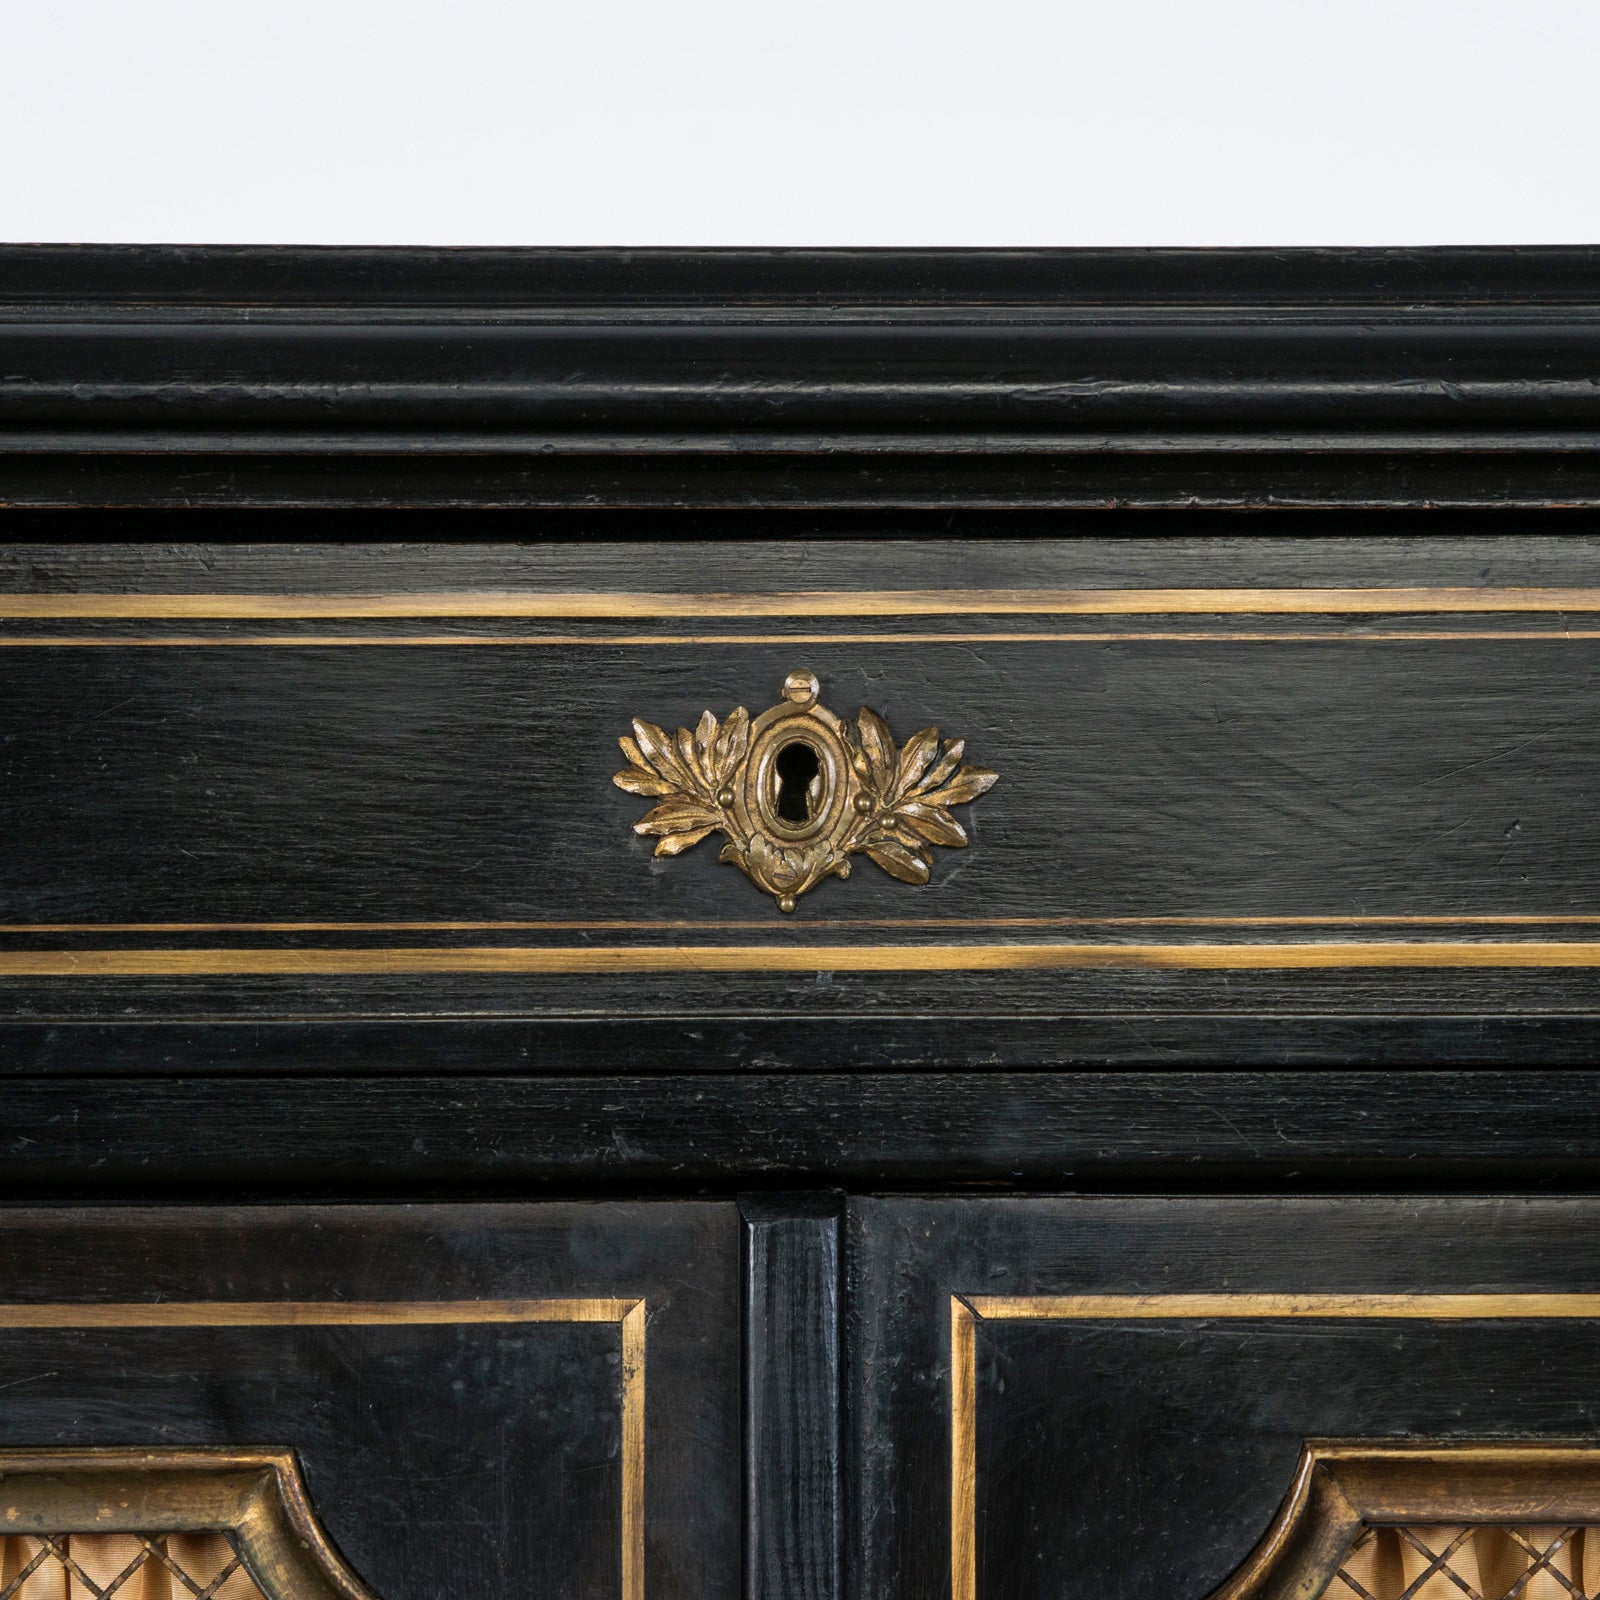 19th C Small Black with Brass Napoleon III Cabinet